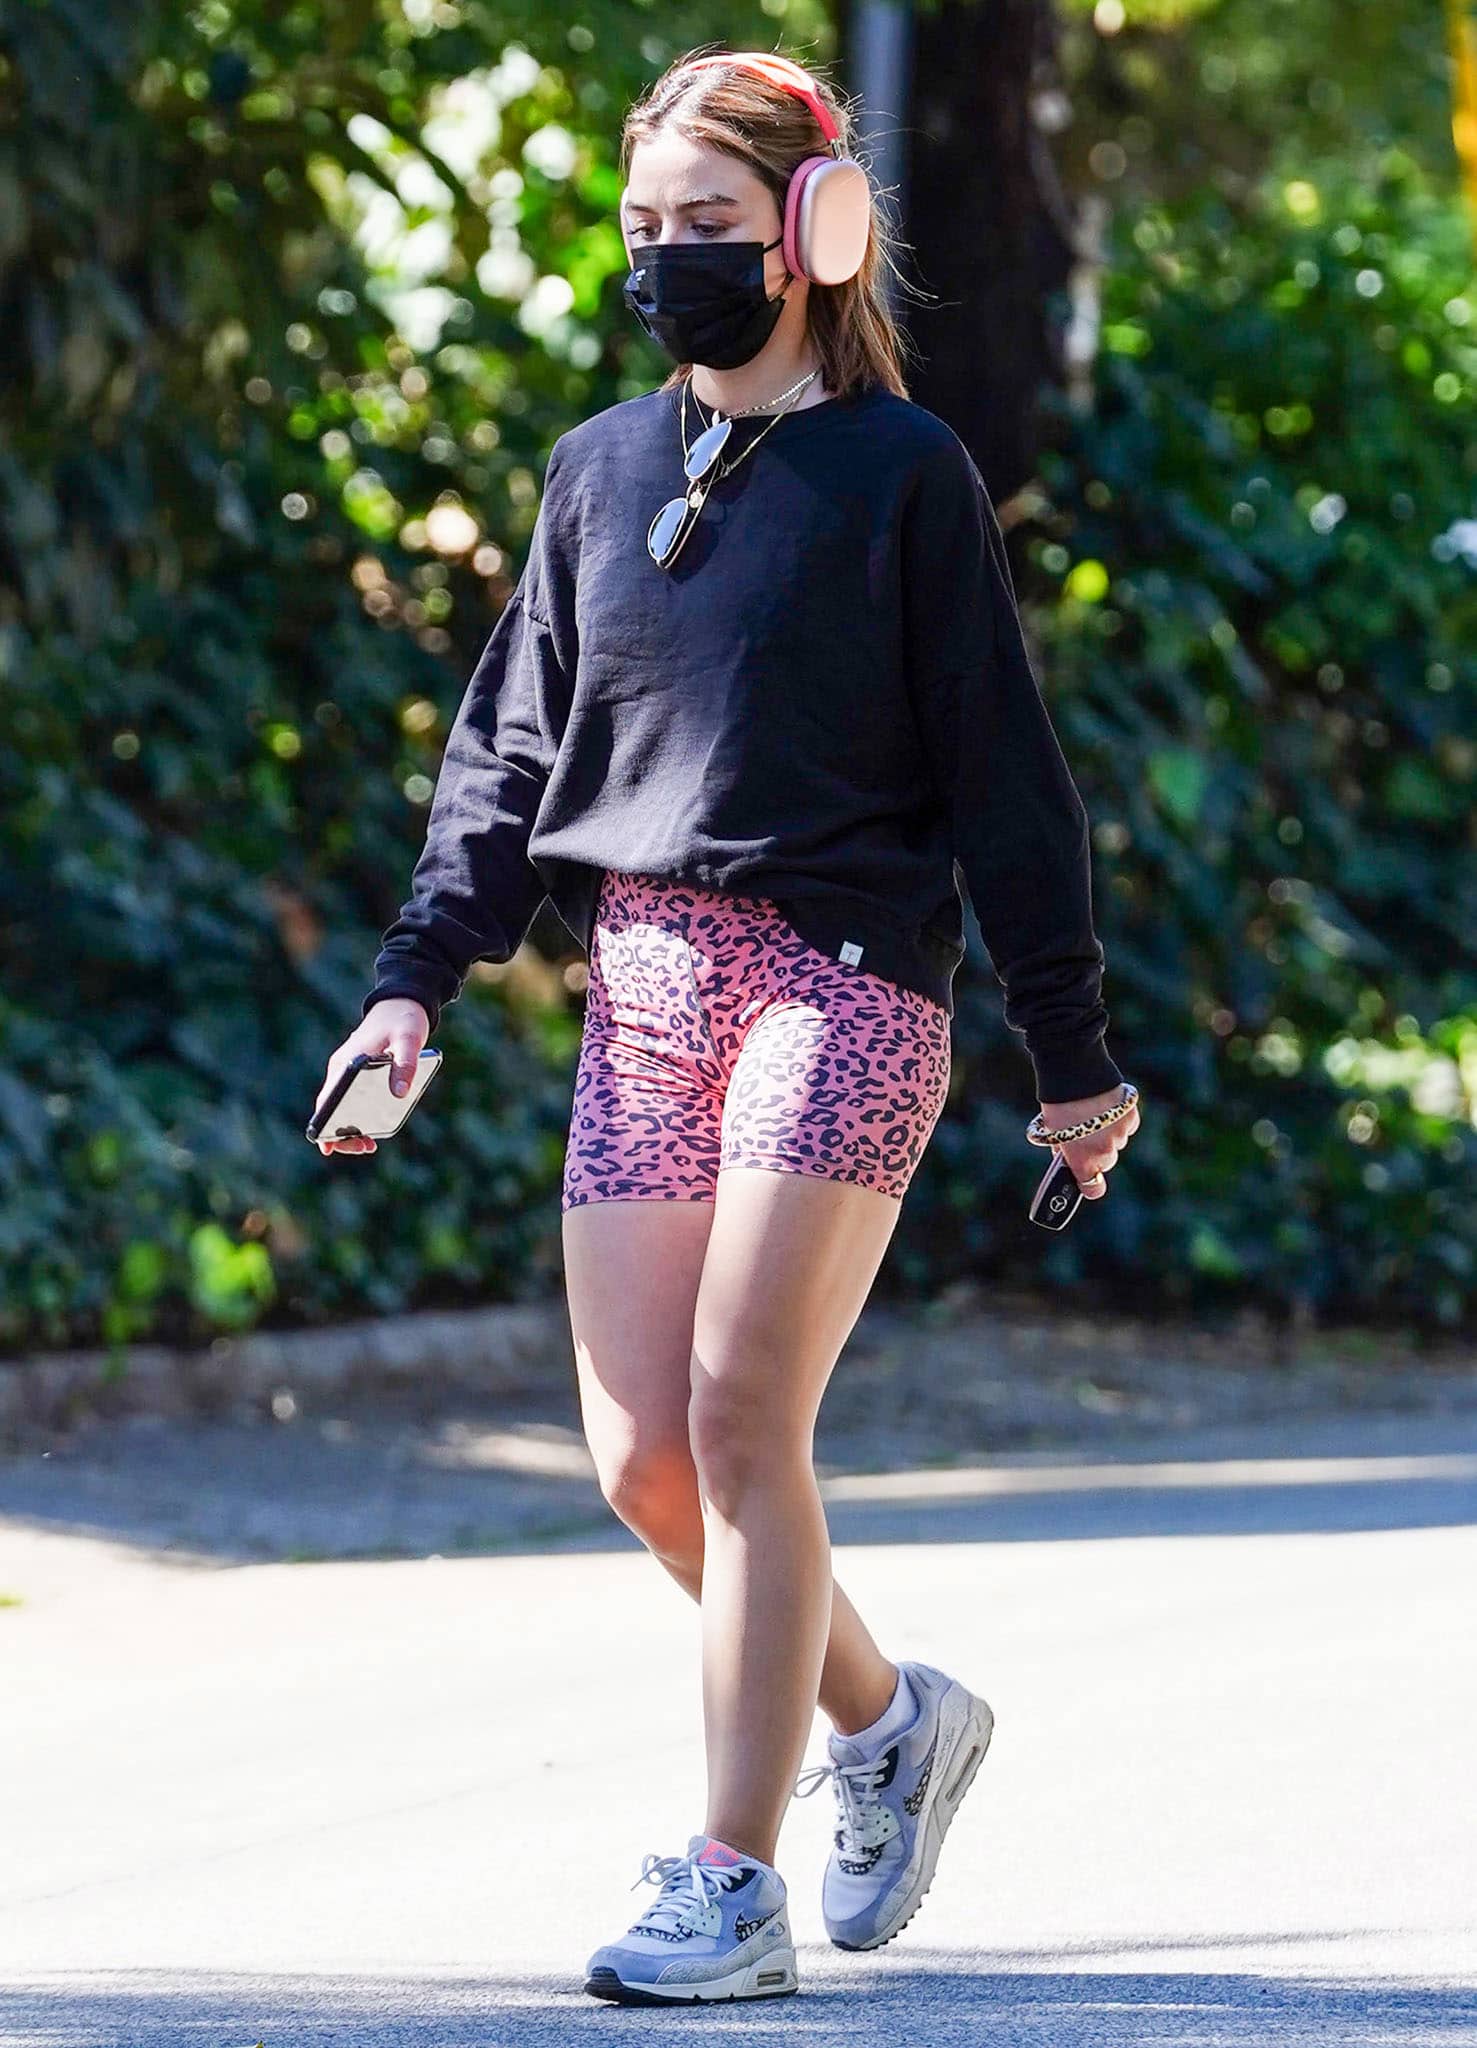 Lucy Hale goes on a solo hike in Aura 7 Activewear pink leopard shorts on February 12, 2021